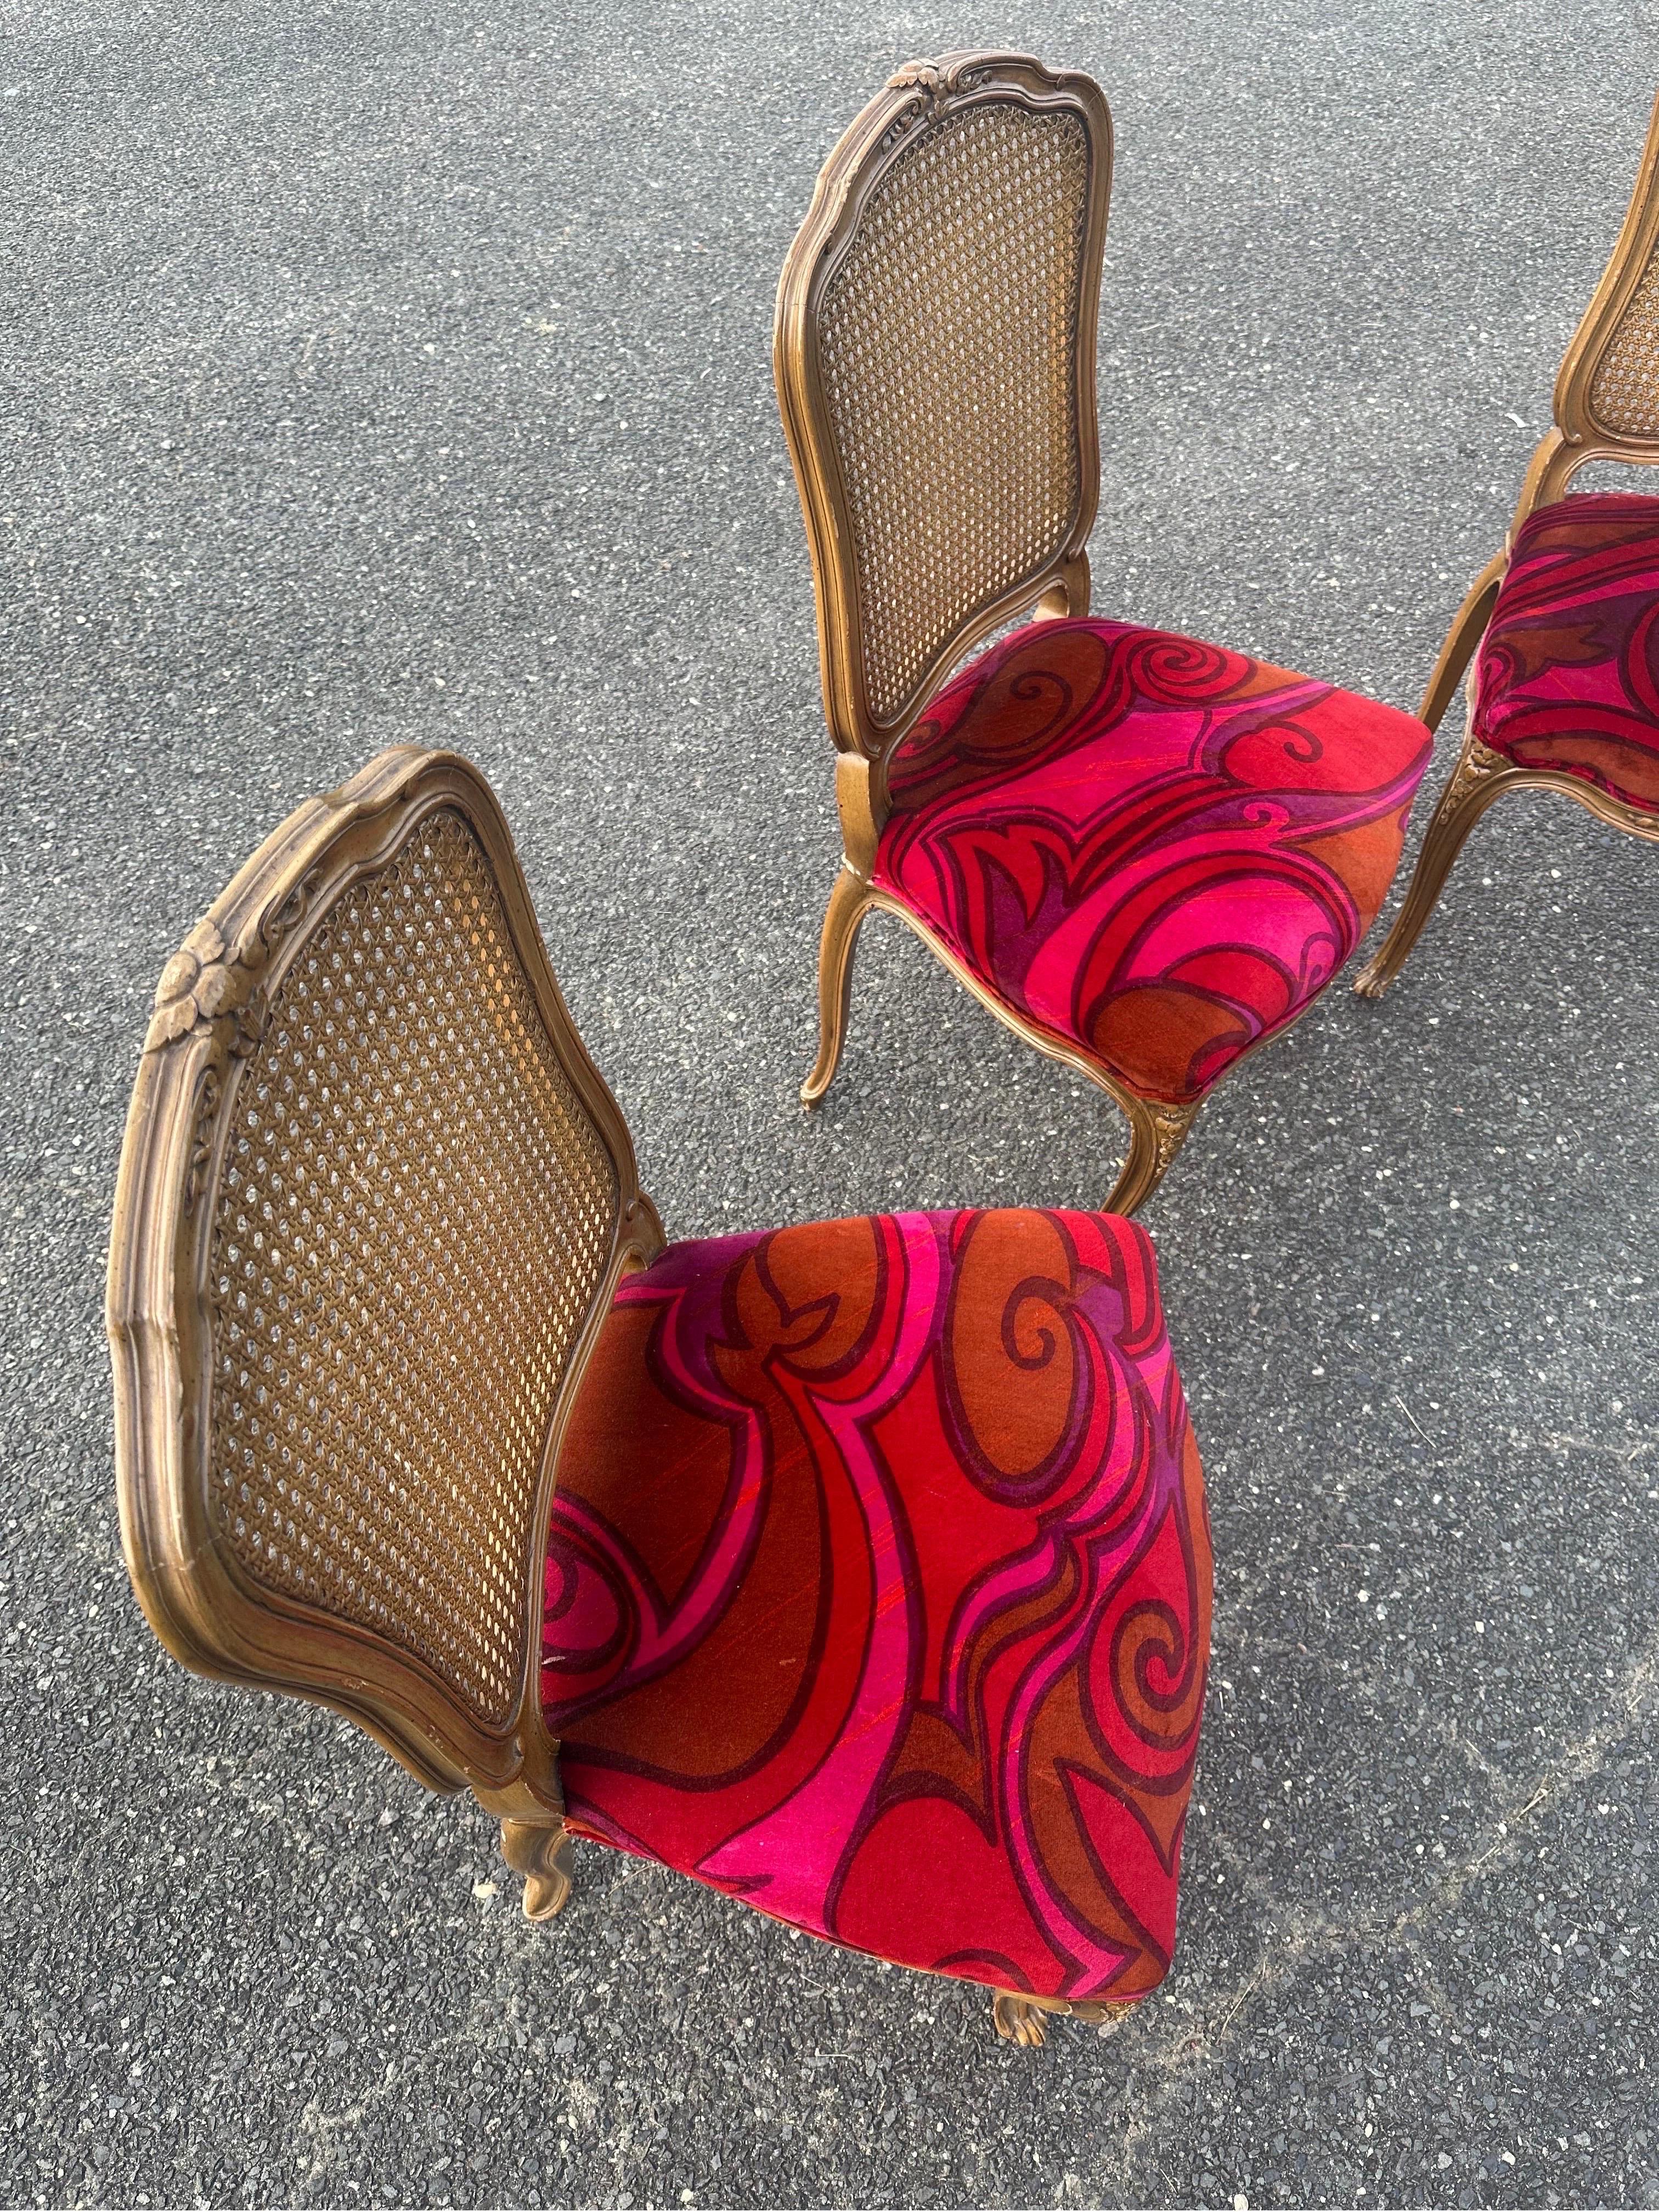 Spring seat dining chairs circa the 1940s reupholstered with JLL velvet seats.

Velvet is extremely vibrant, with piping on edges. 

Chairs are unmarked circa 1940s, spring seats. Comfortable showing some age patina and charm. 